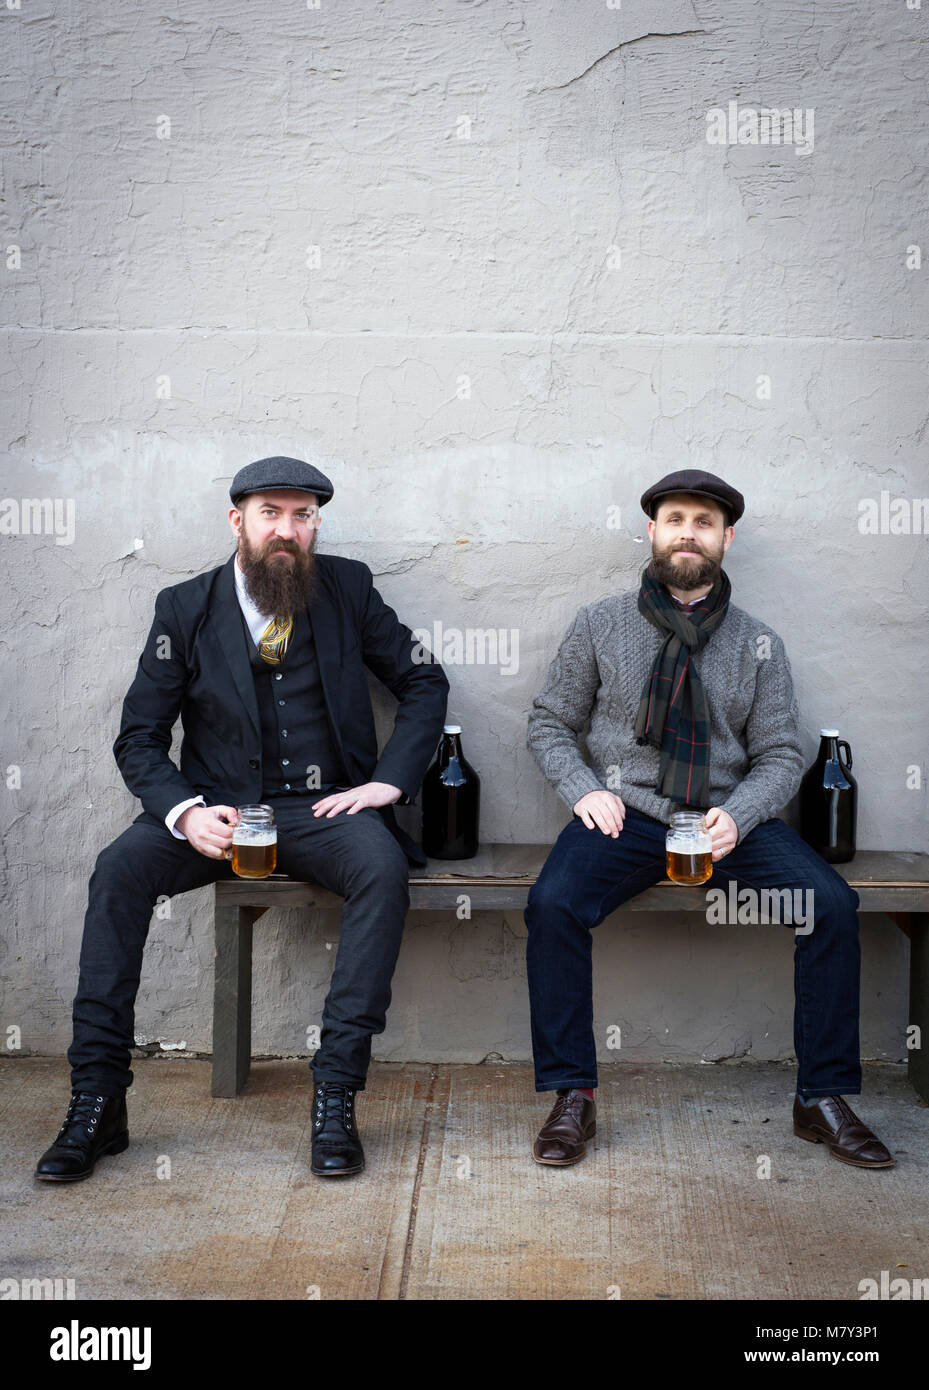 Two men sitting outside drinking beer. Stock Photo